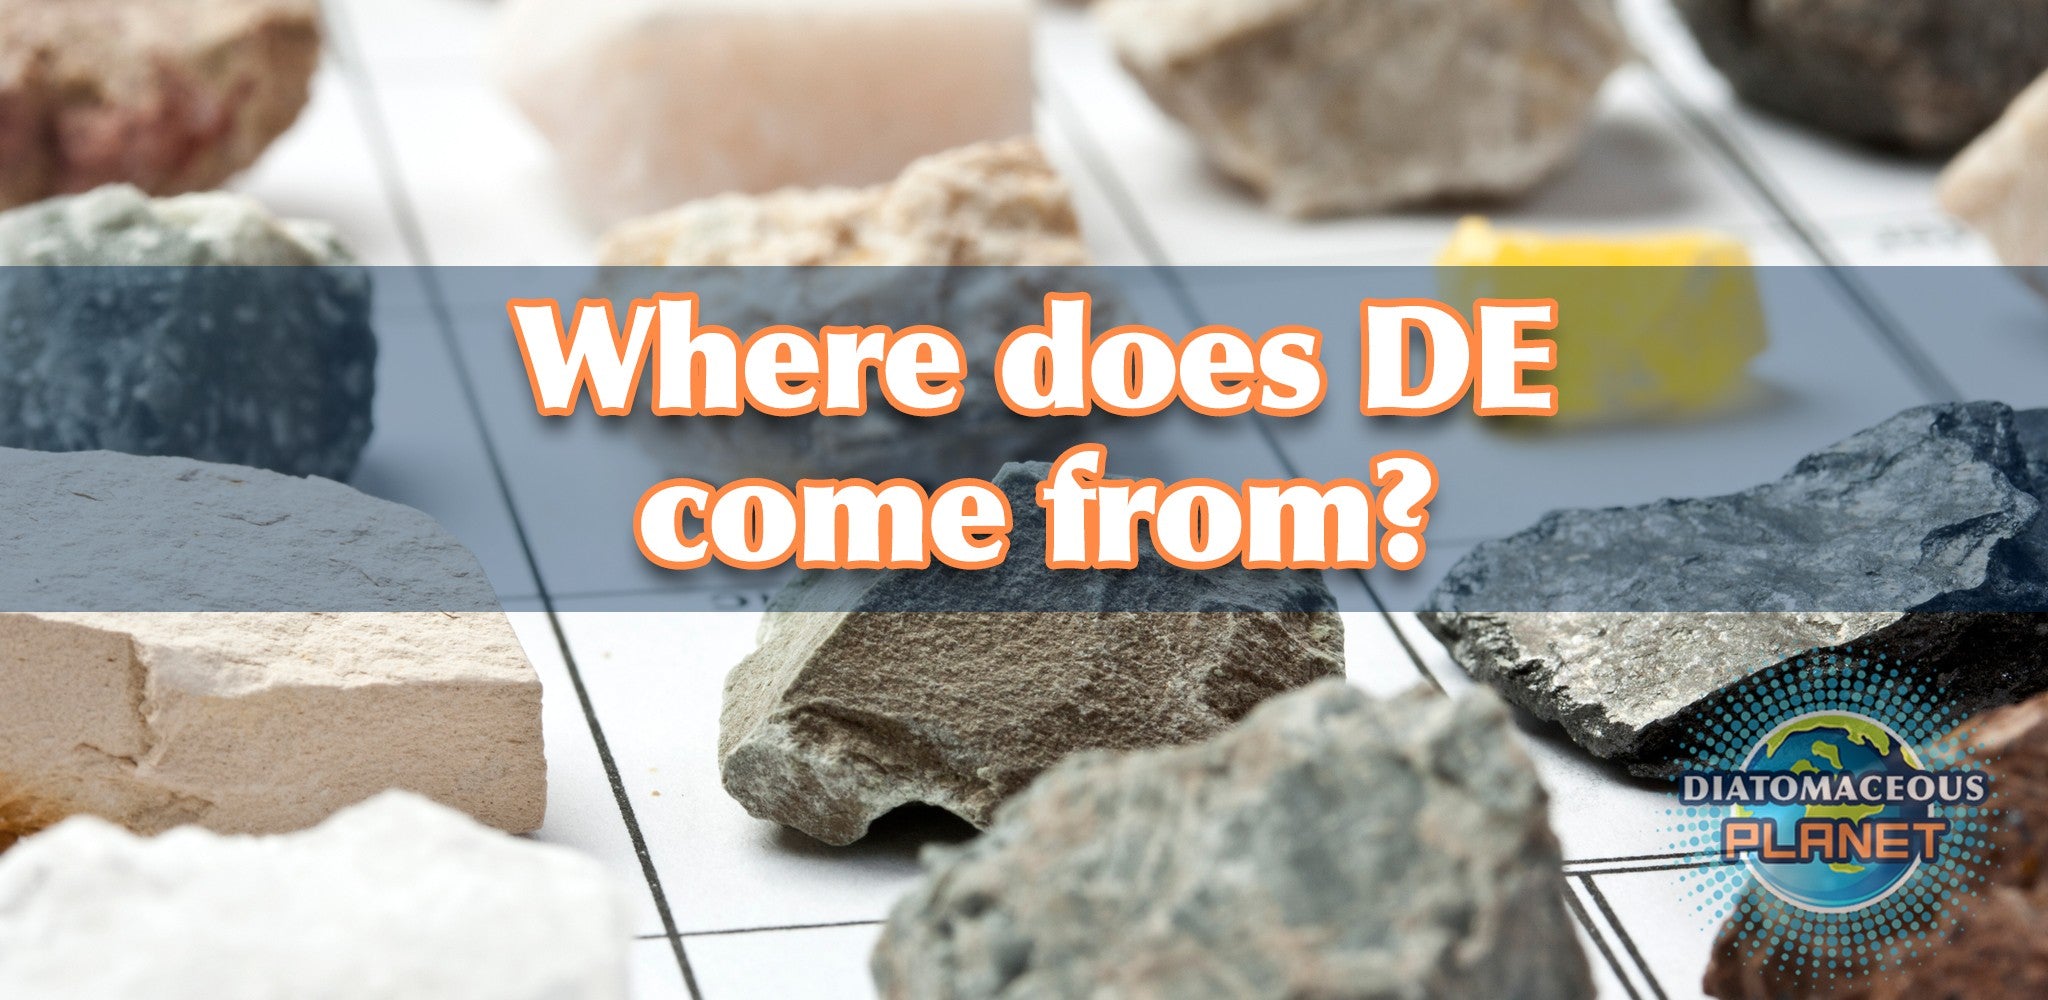 Where does Diatomaceous Earth come from?